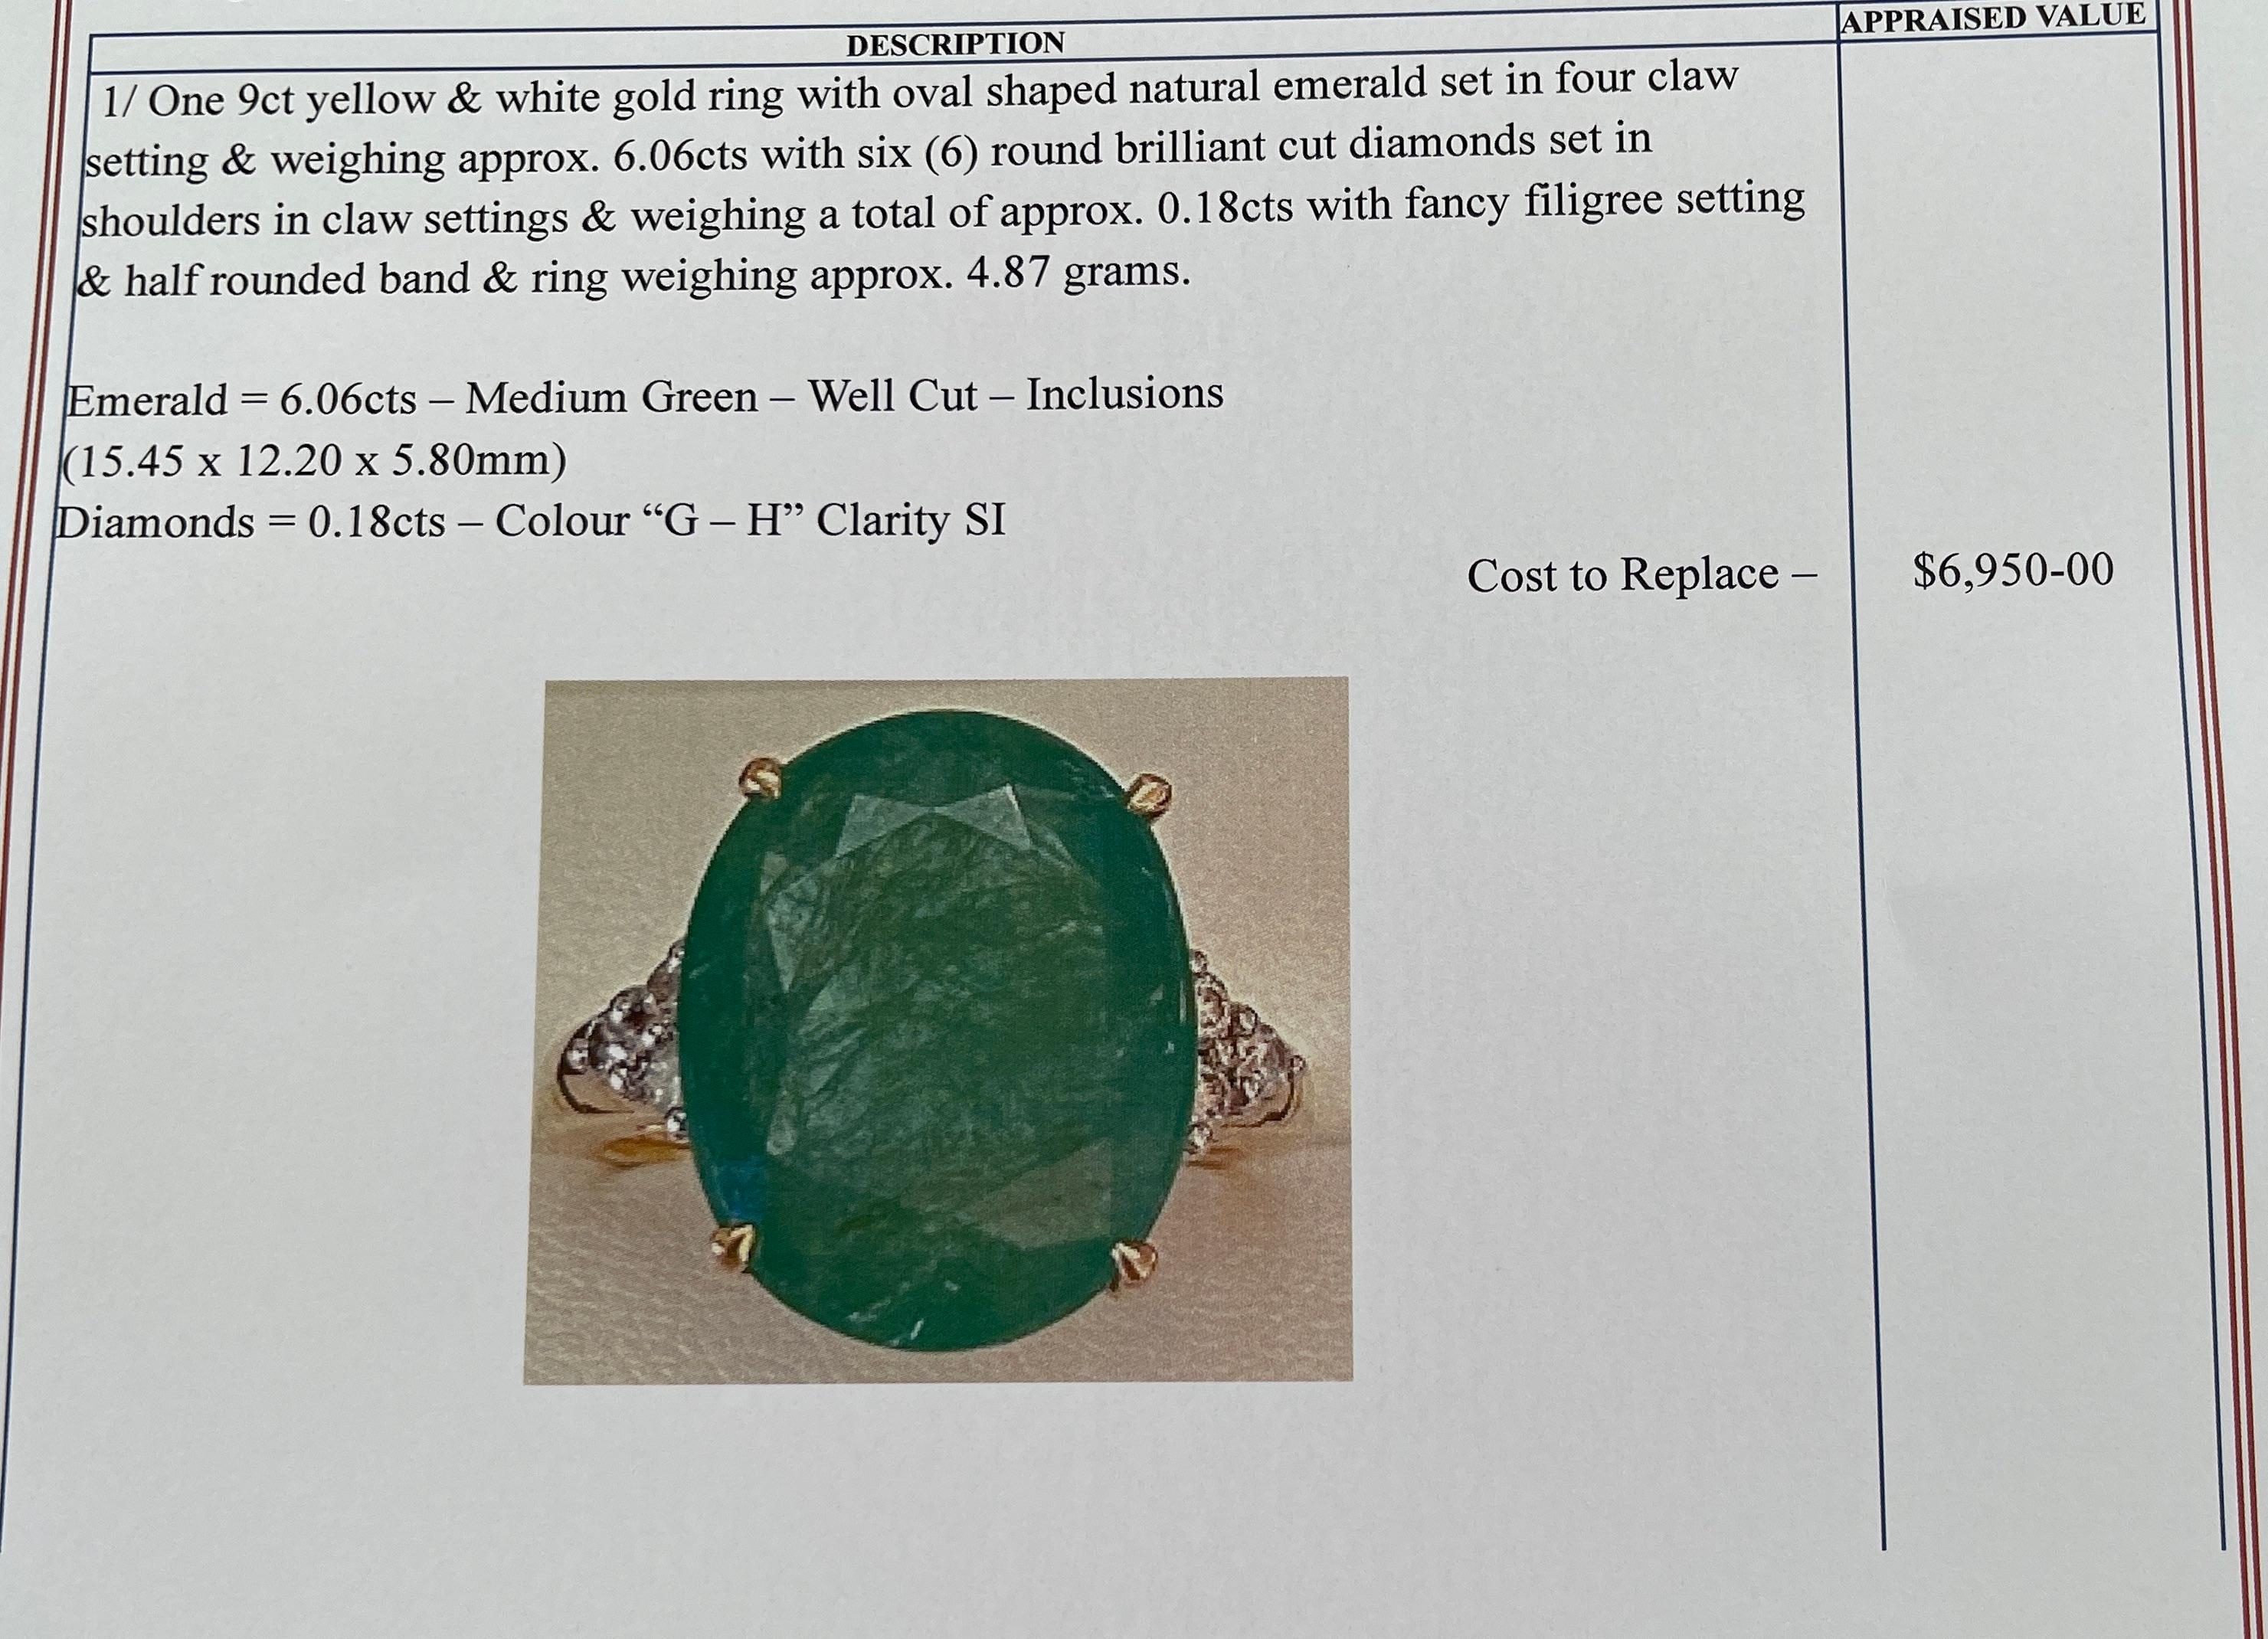 Large 6.06ct Oval Emerald Diamond Ring 9ct Yellow Gold Decorative Gallery In New Condition For Sale In Mona Vale, NSW